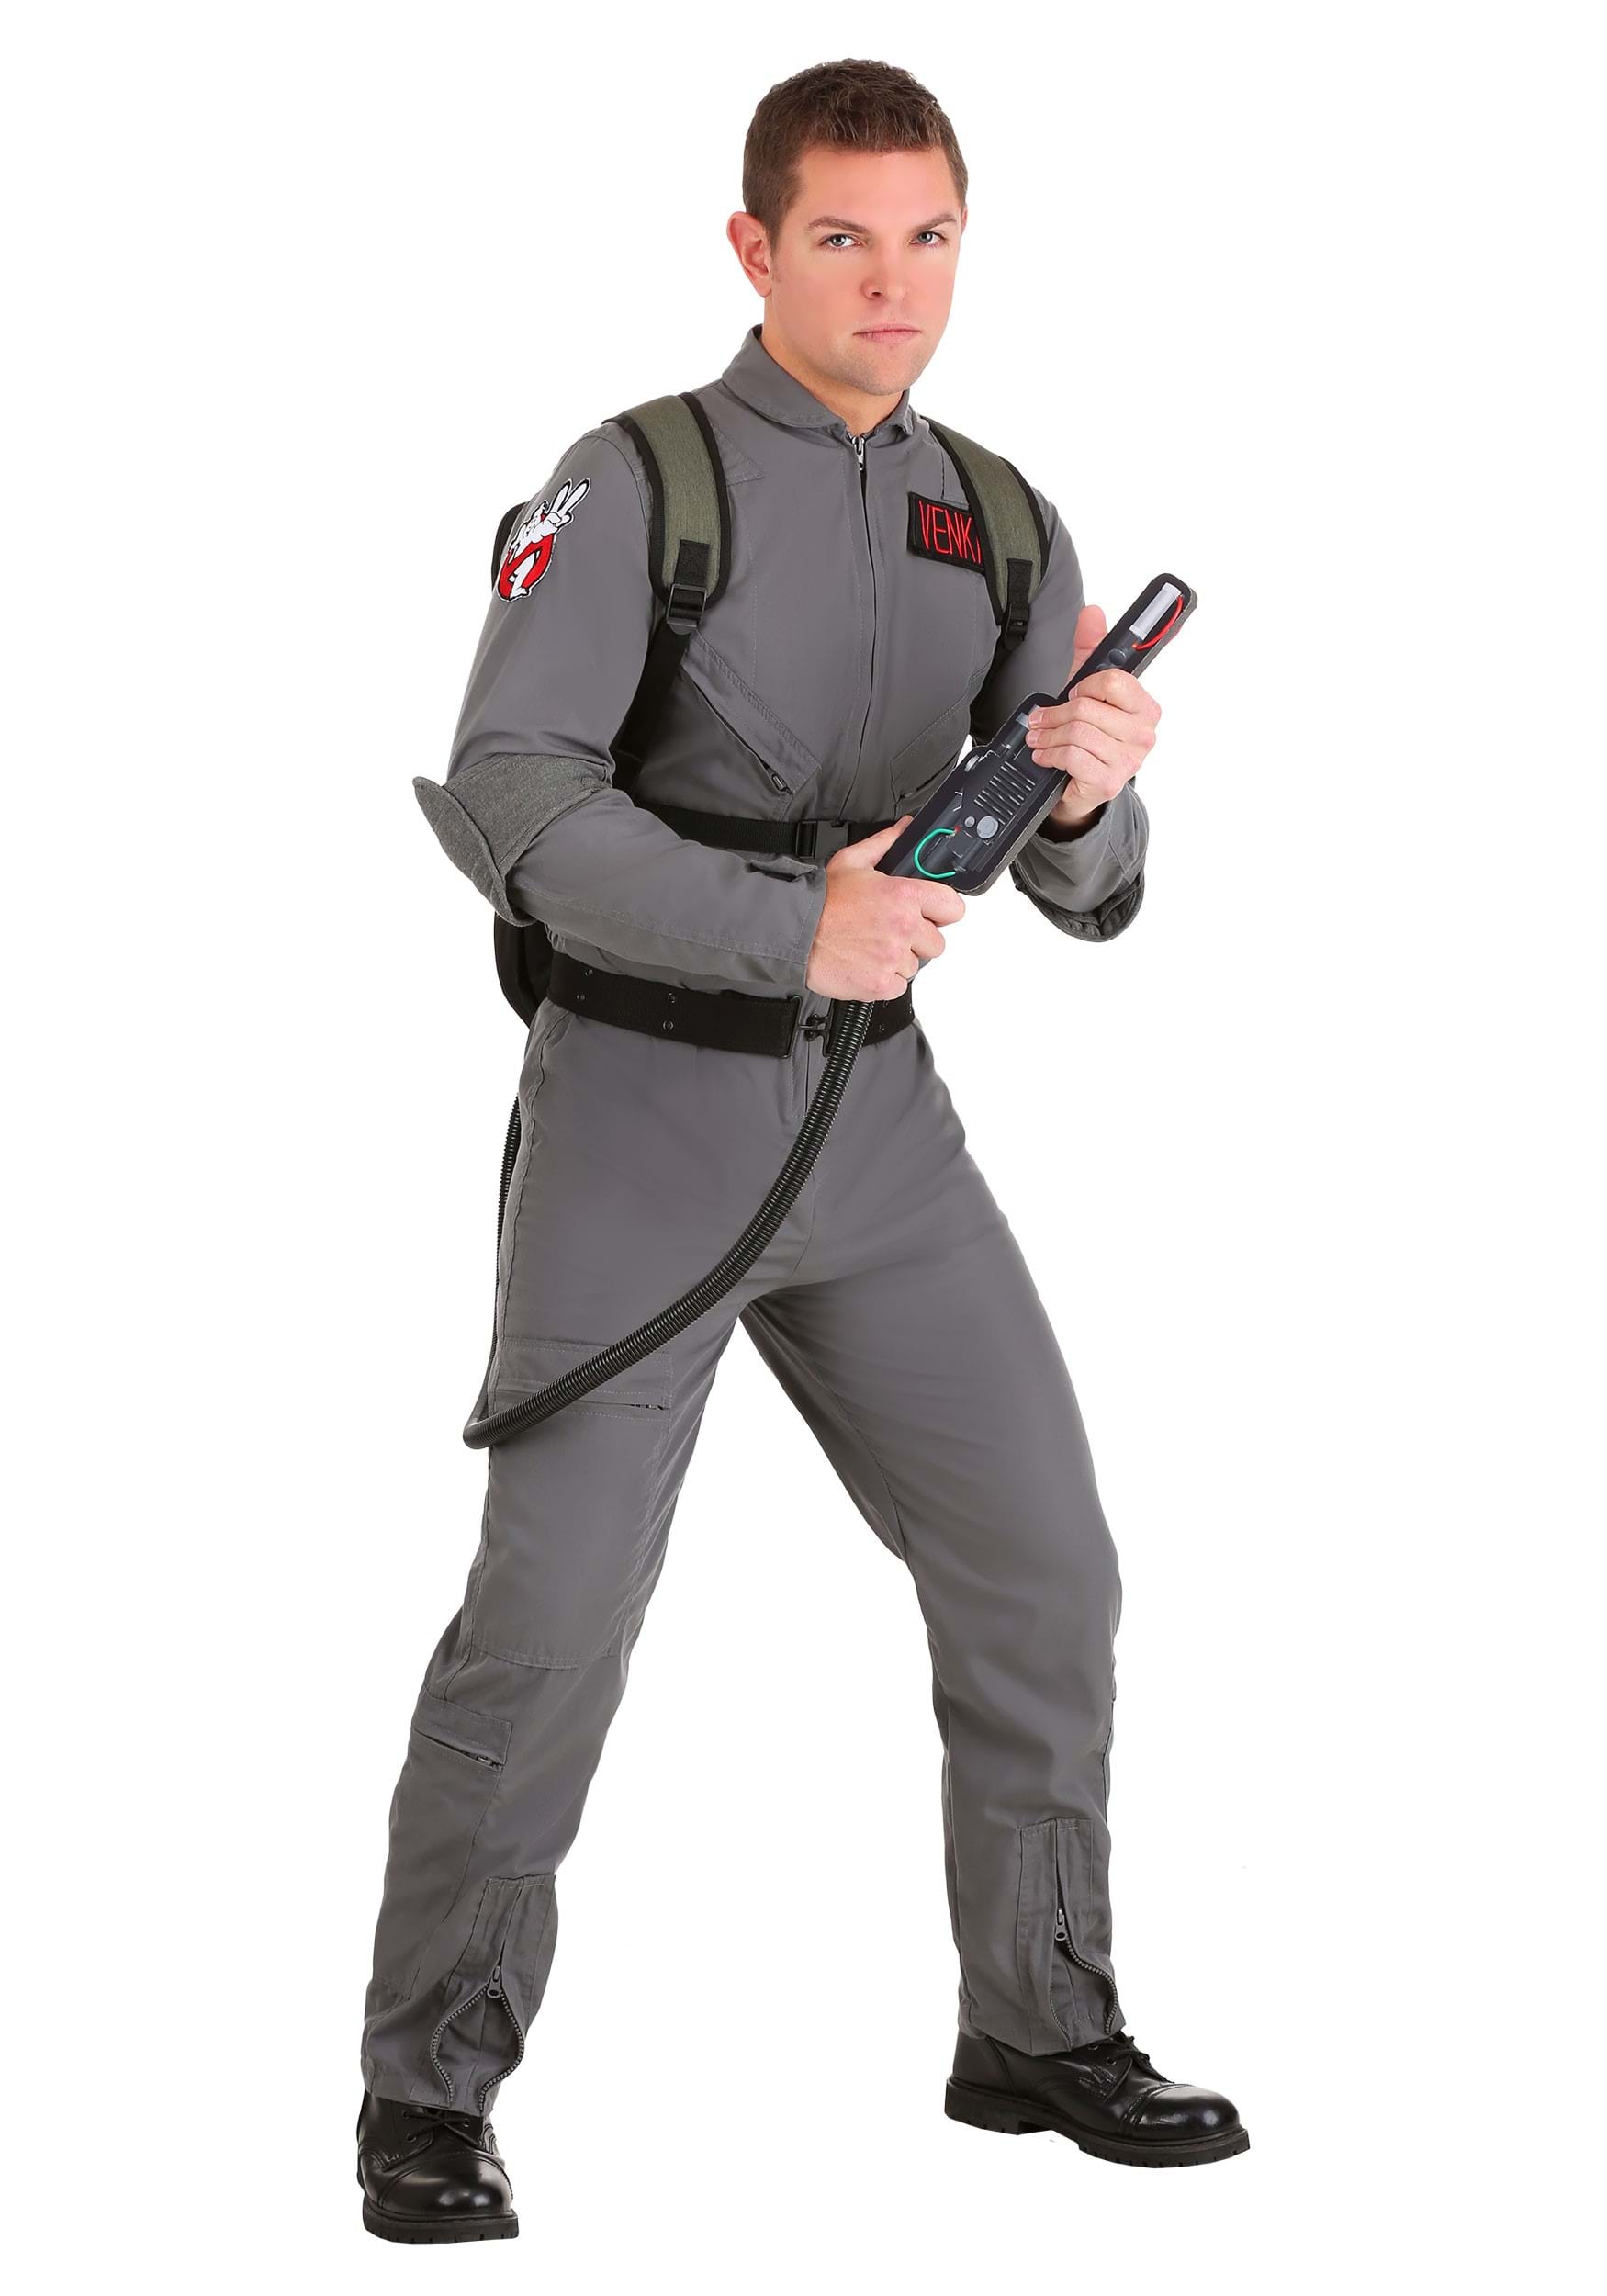 Photos - Fancy Dress Ghostbusters FUN Costumes Men's  2 Cosplay Costume Black/Gray/Red F 